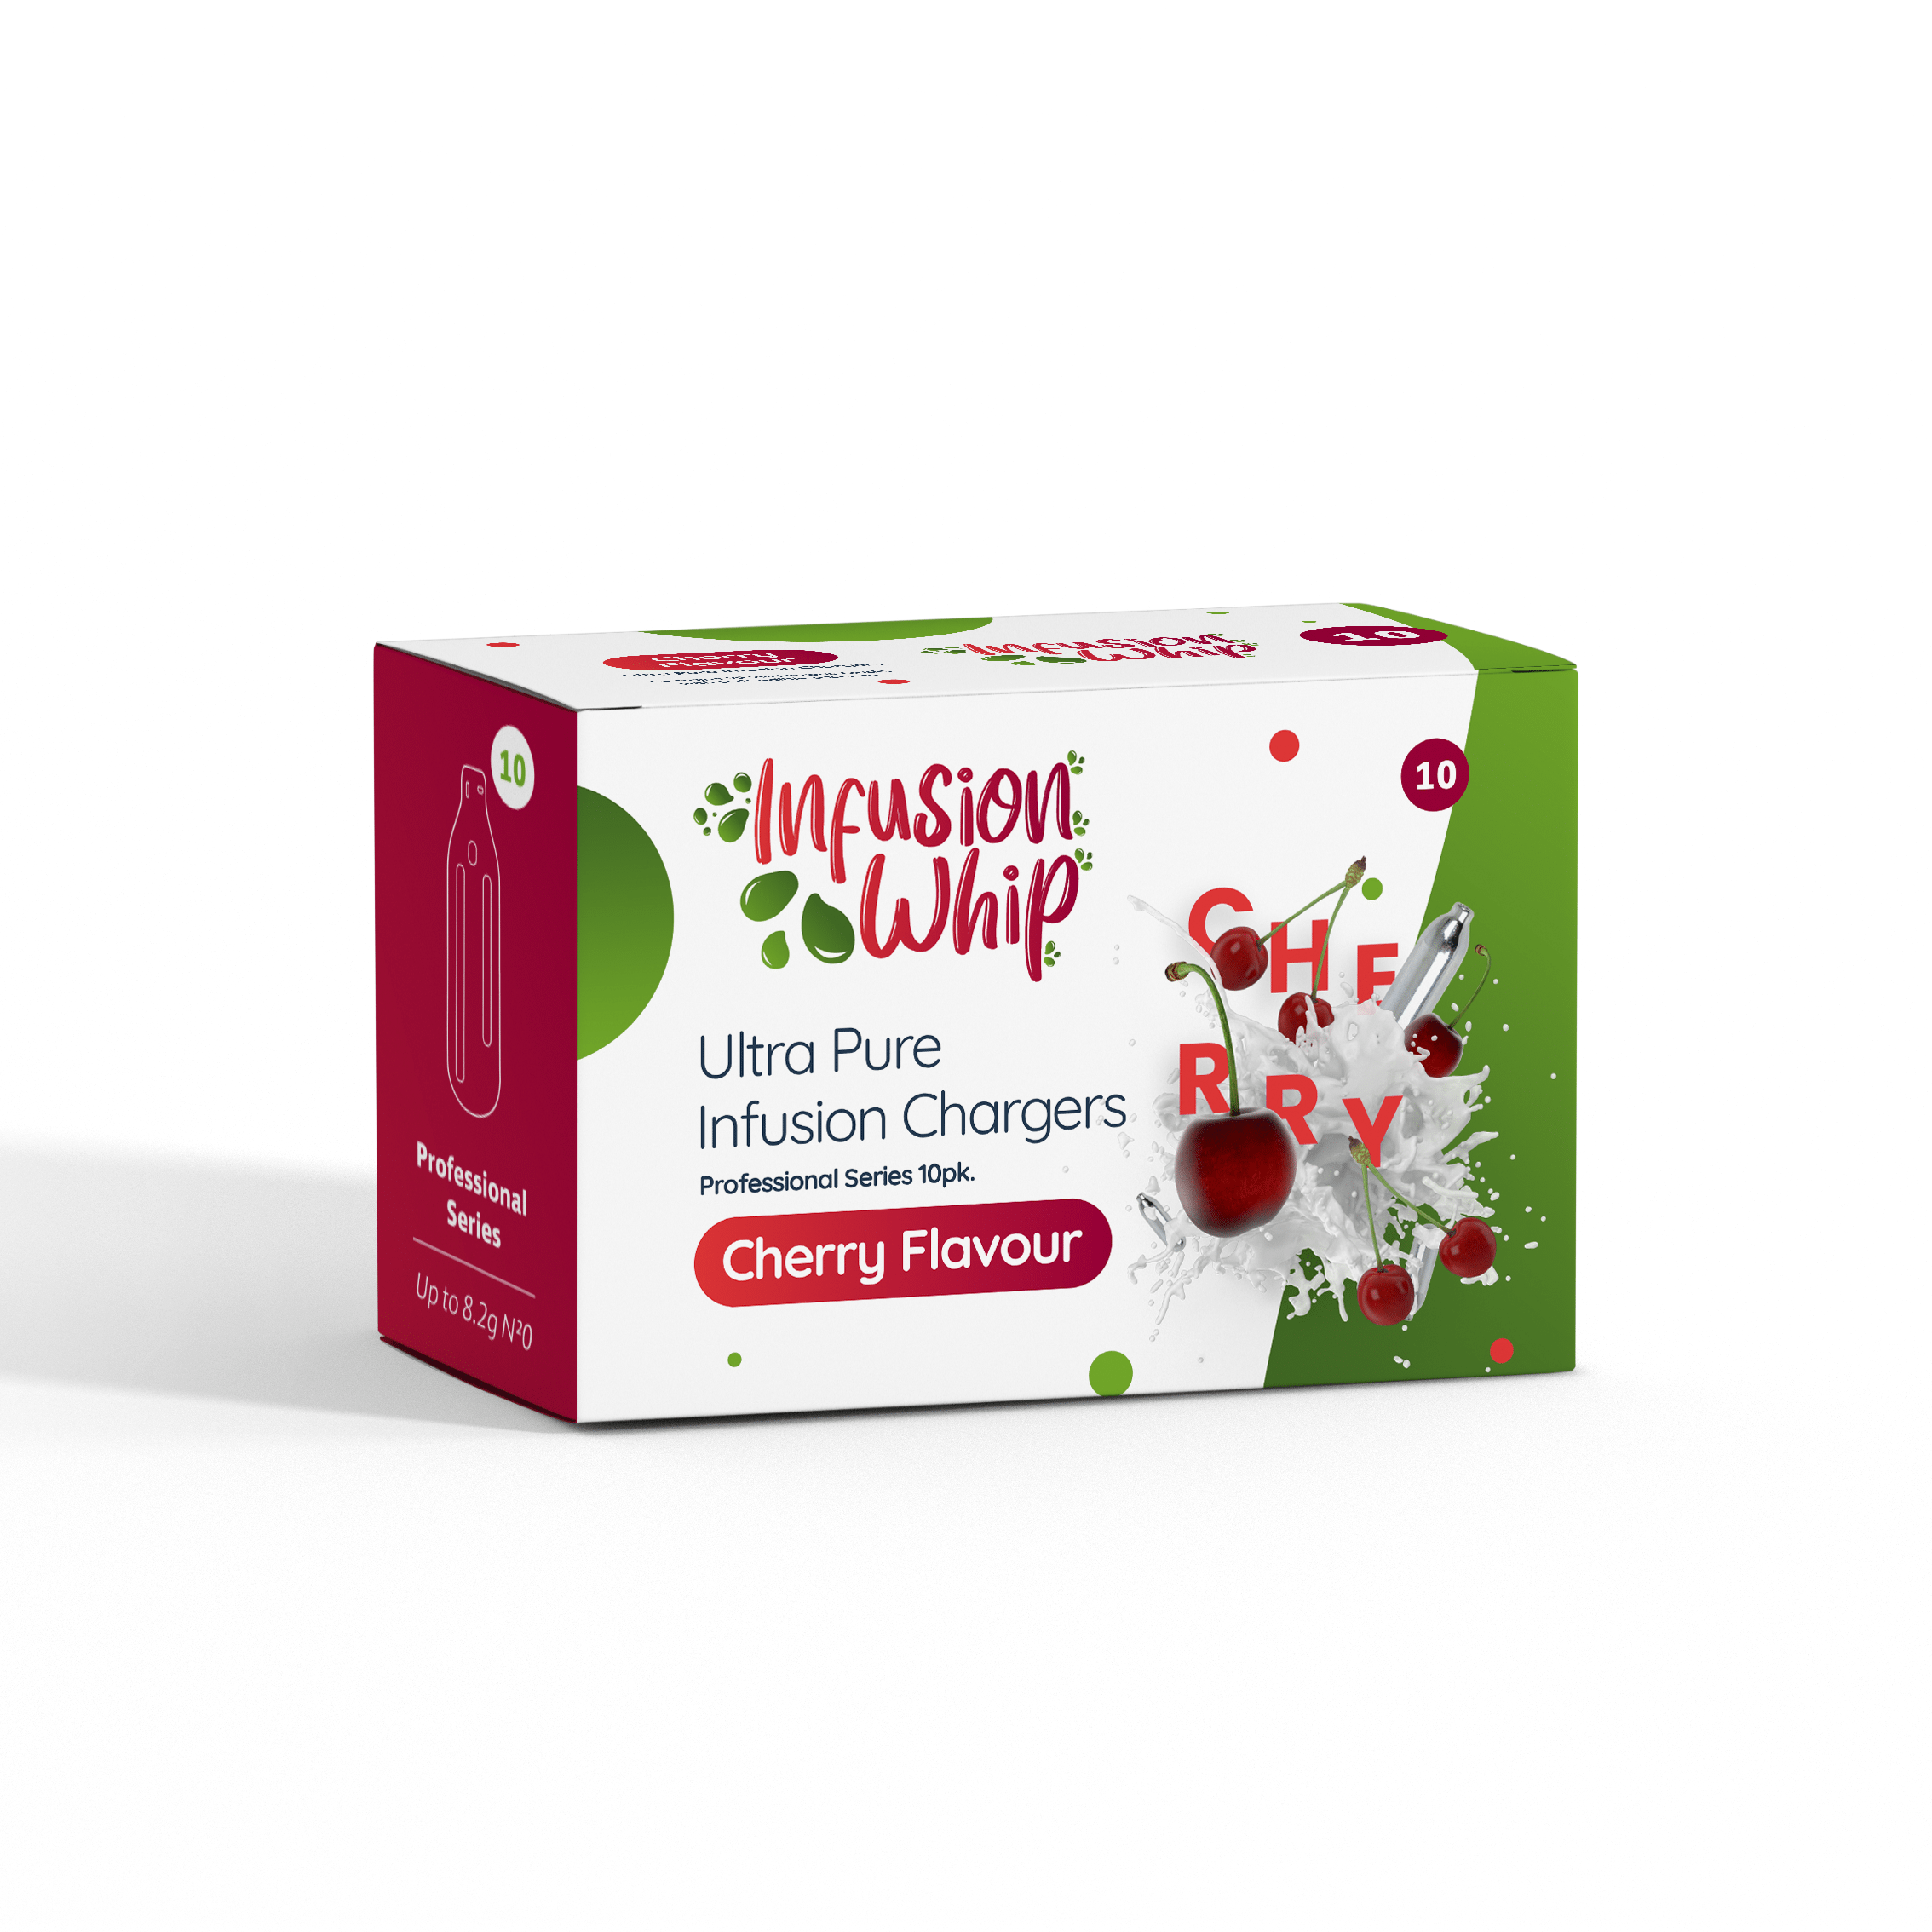 New Infusionwhip Cherry Infusion Chargers 8.2g - 10pks